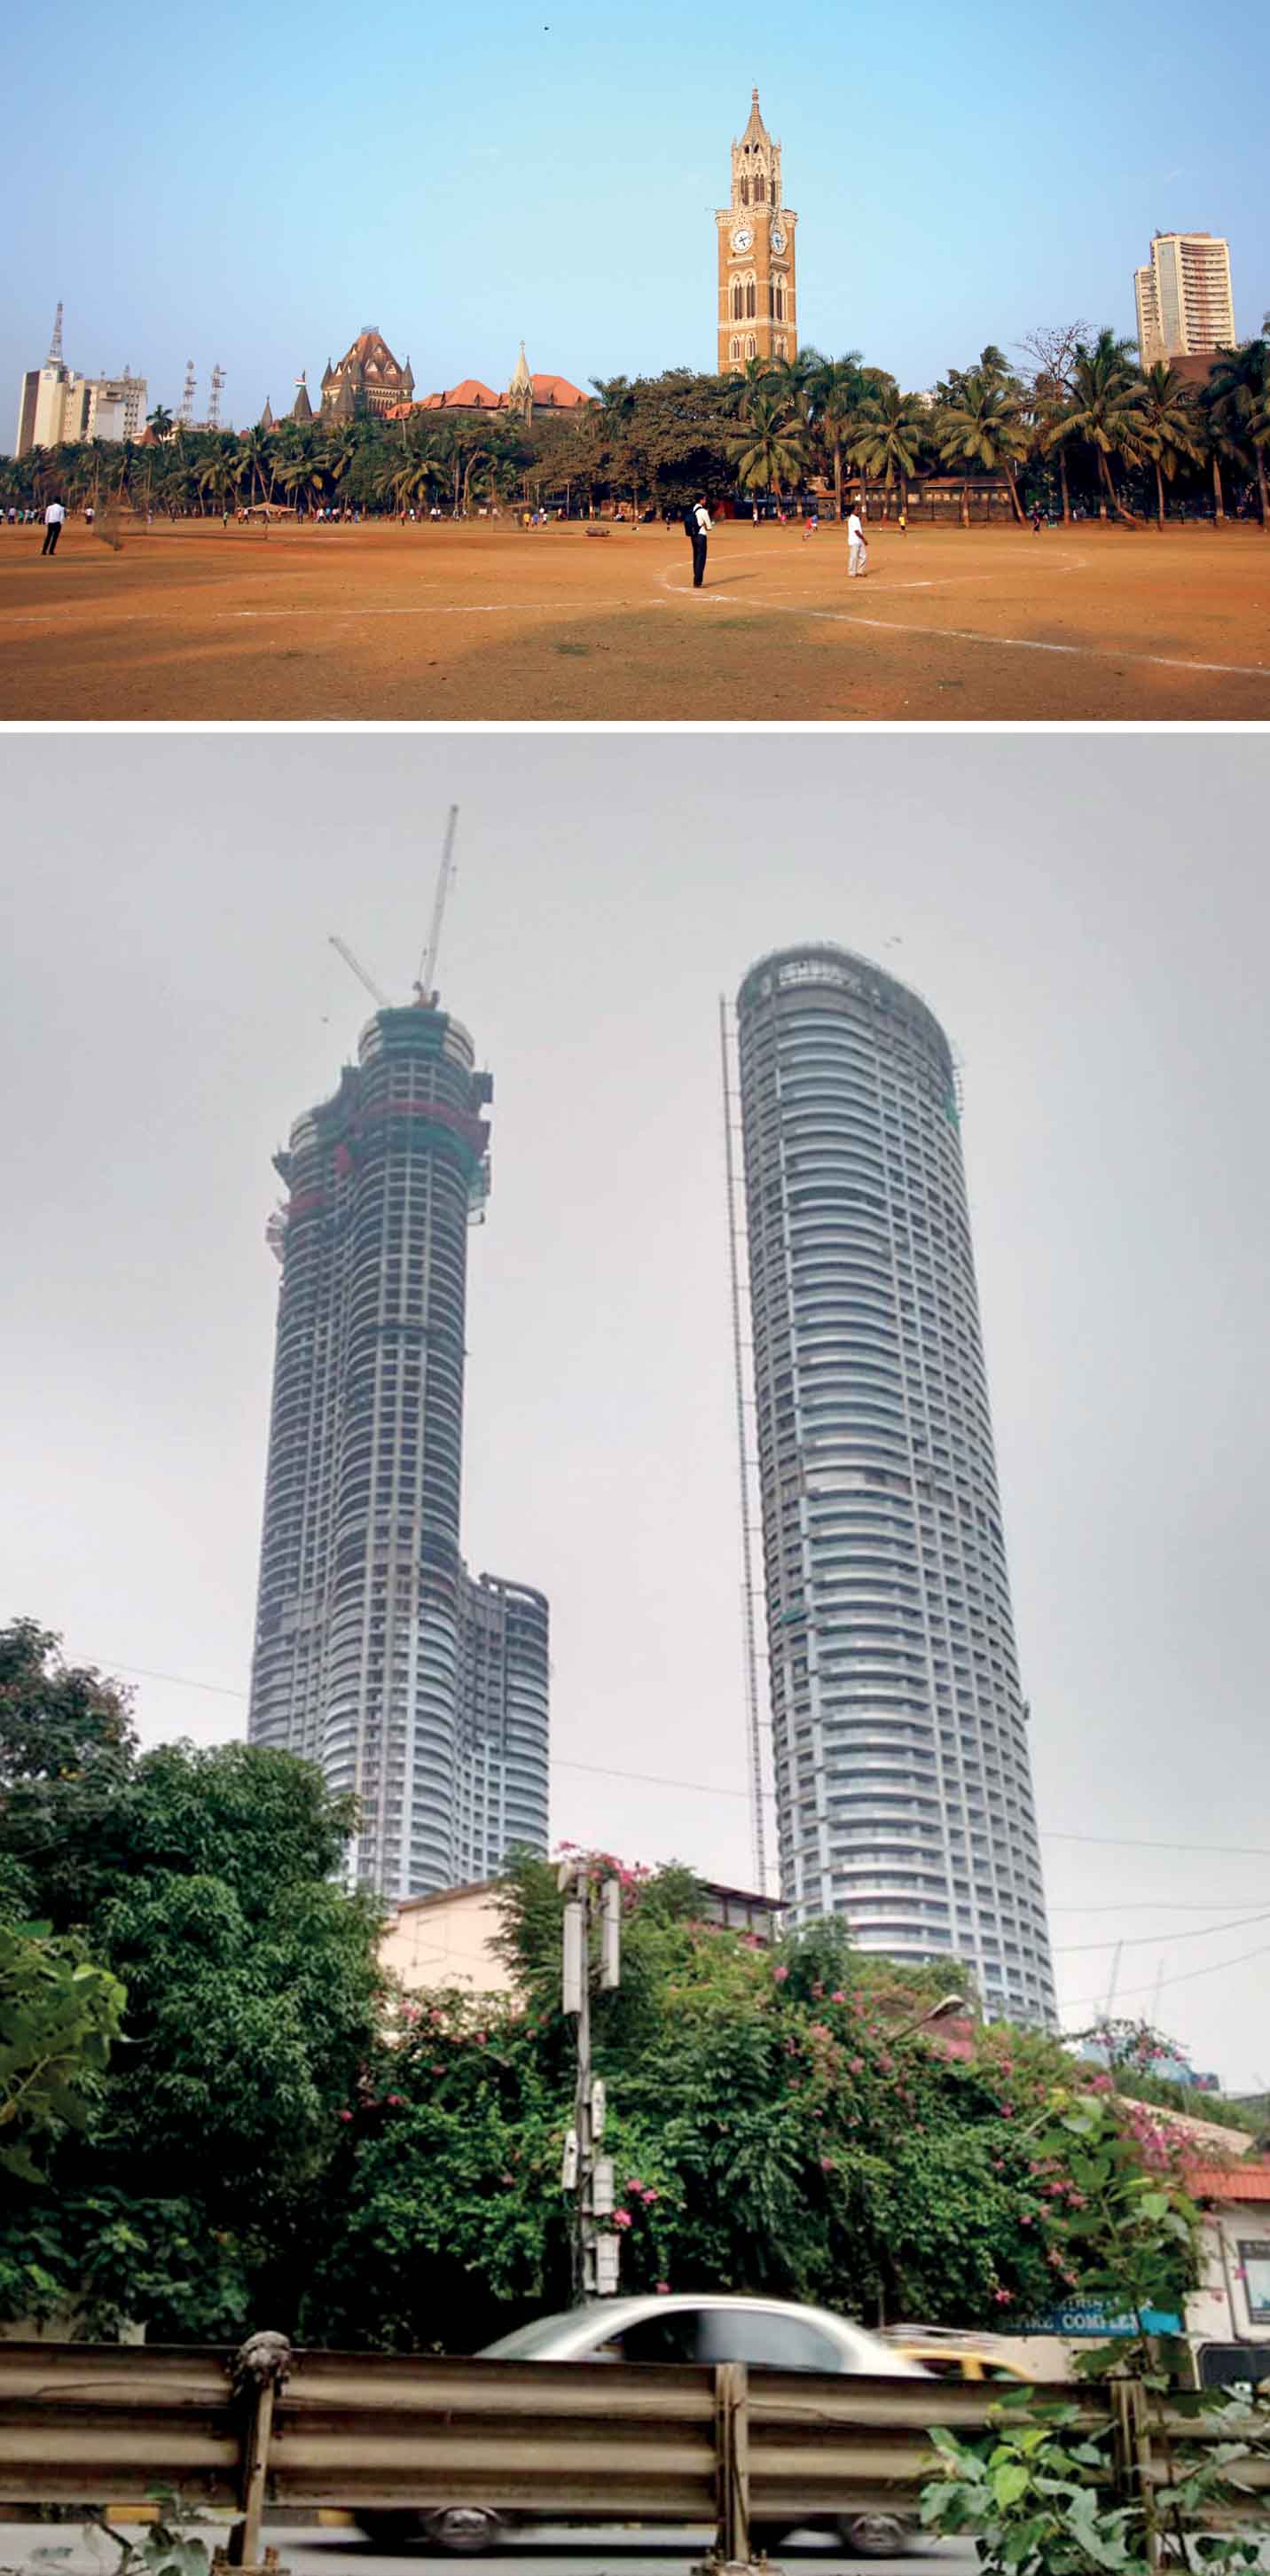 building-hope-recently-restored-rajabai-tower-mumbai-university-complex-tower-sits-centre-unesco-world-heritage-listed-ensemble-buildings-victorian-gothic-art-deco-marine-drive-oval-fort-areas-mumbai-stands-testament-city-cosmopolitan-past-world-towers-collaboration-with-pei-cobb-freed-partners-one-india-tallest-residential-built-amidst-erstwhile-mill-lands-surrounded-mall-several-commercial-complexes-example-rapid-urbanisation-infrastructural-development-industrial-wasteland